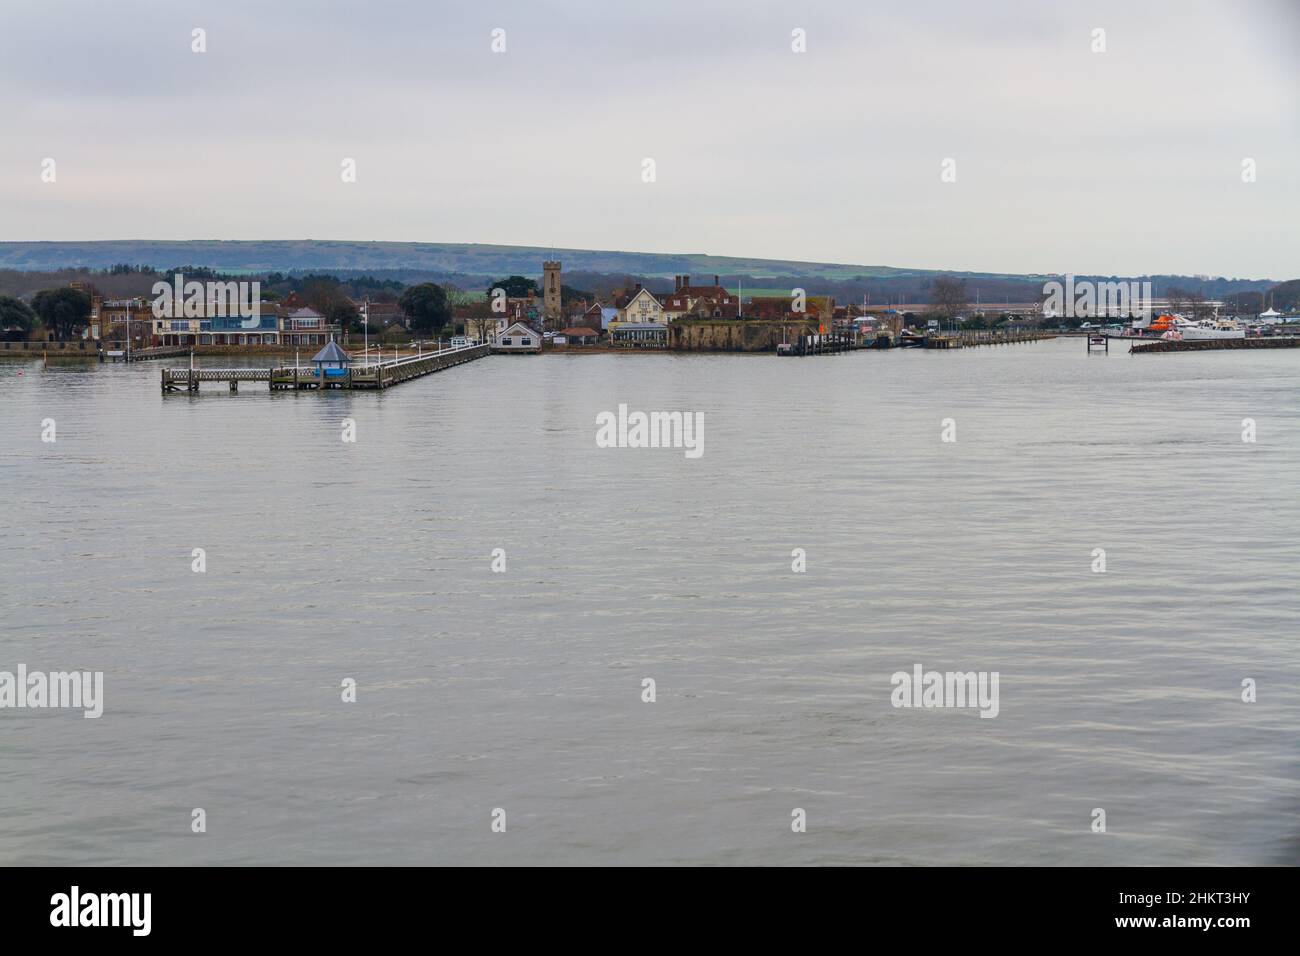 View of Yarmouth on the Isle of Wight, taken from the sea, landscape Stock Photo